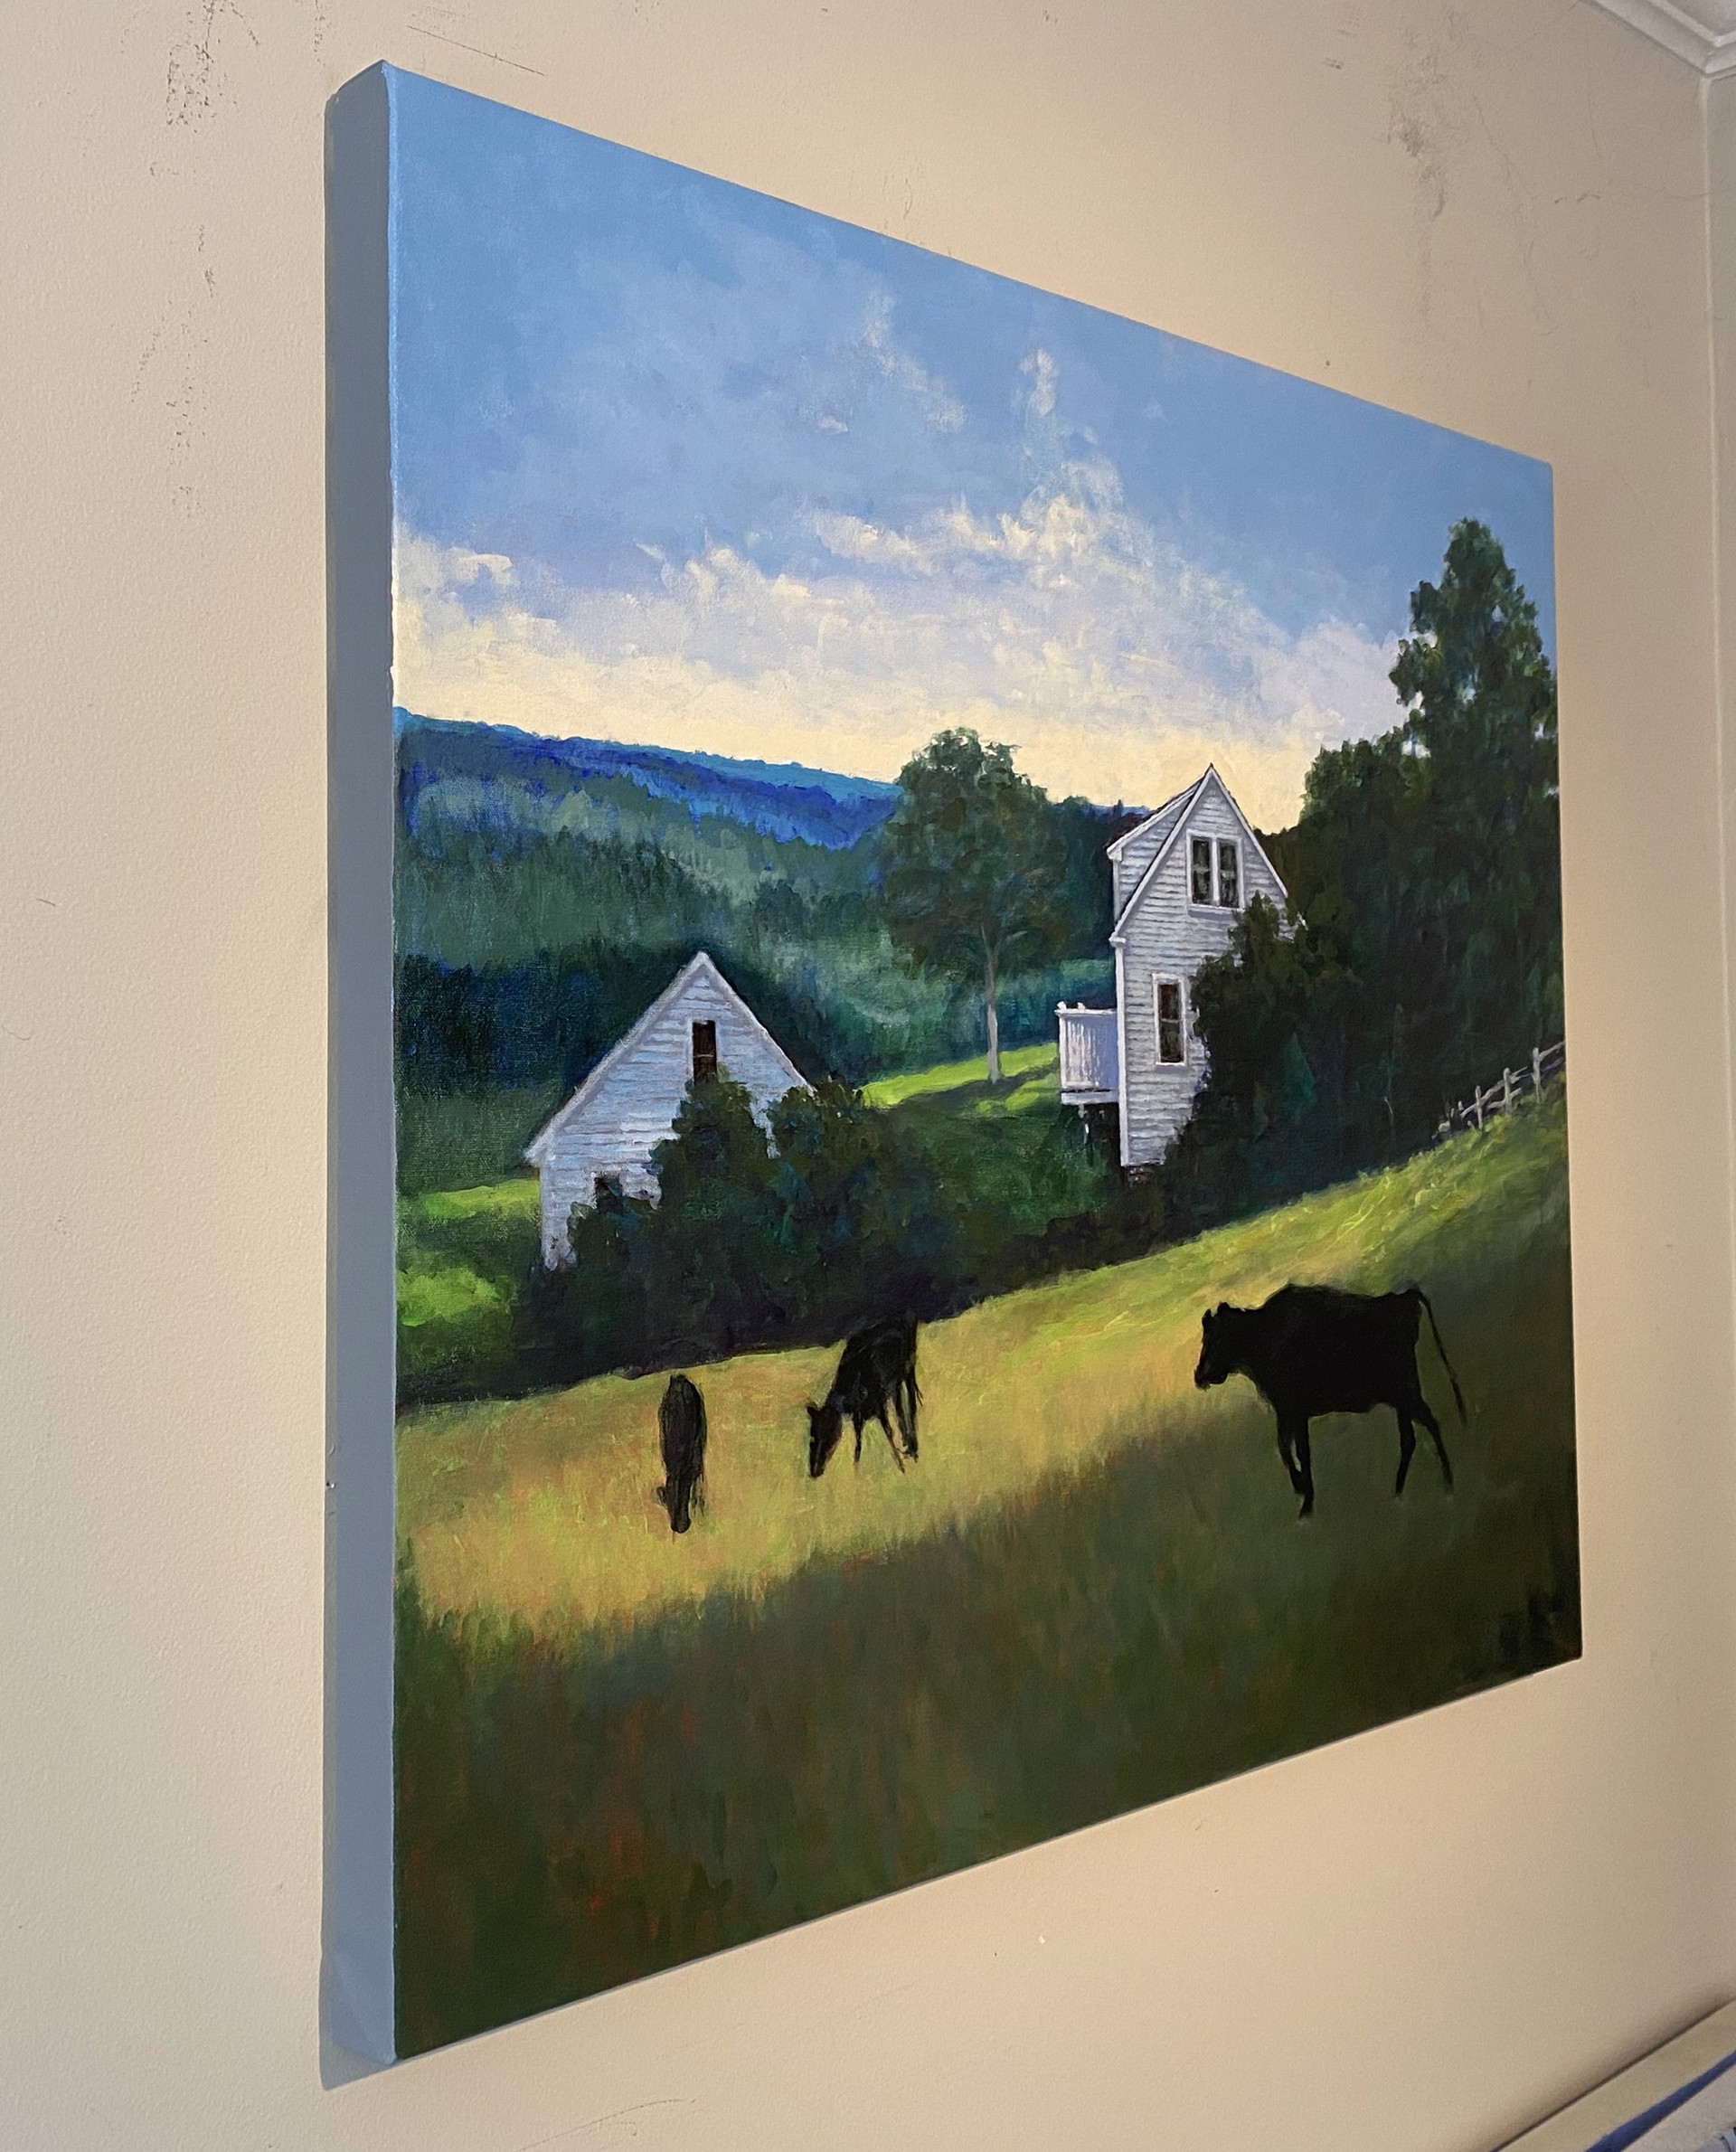 Black Cows in the Afternoon by Douglas H. Caves Sr.